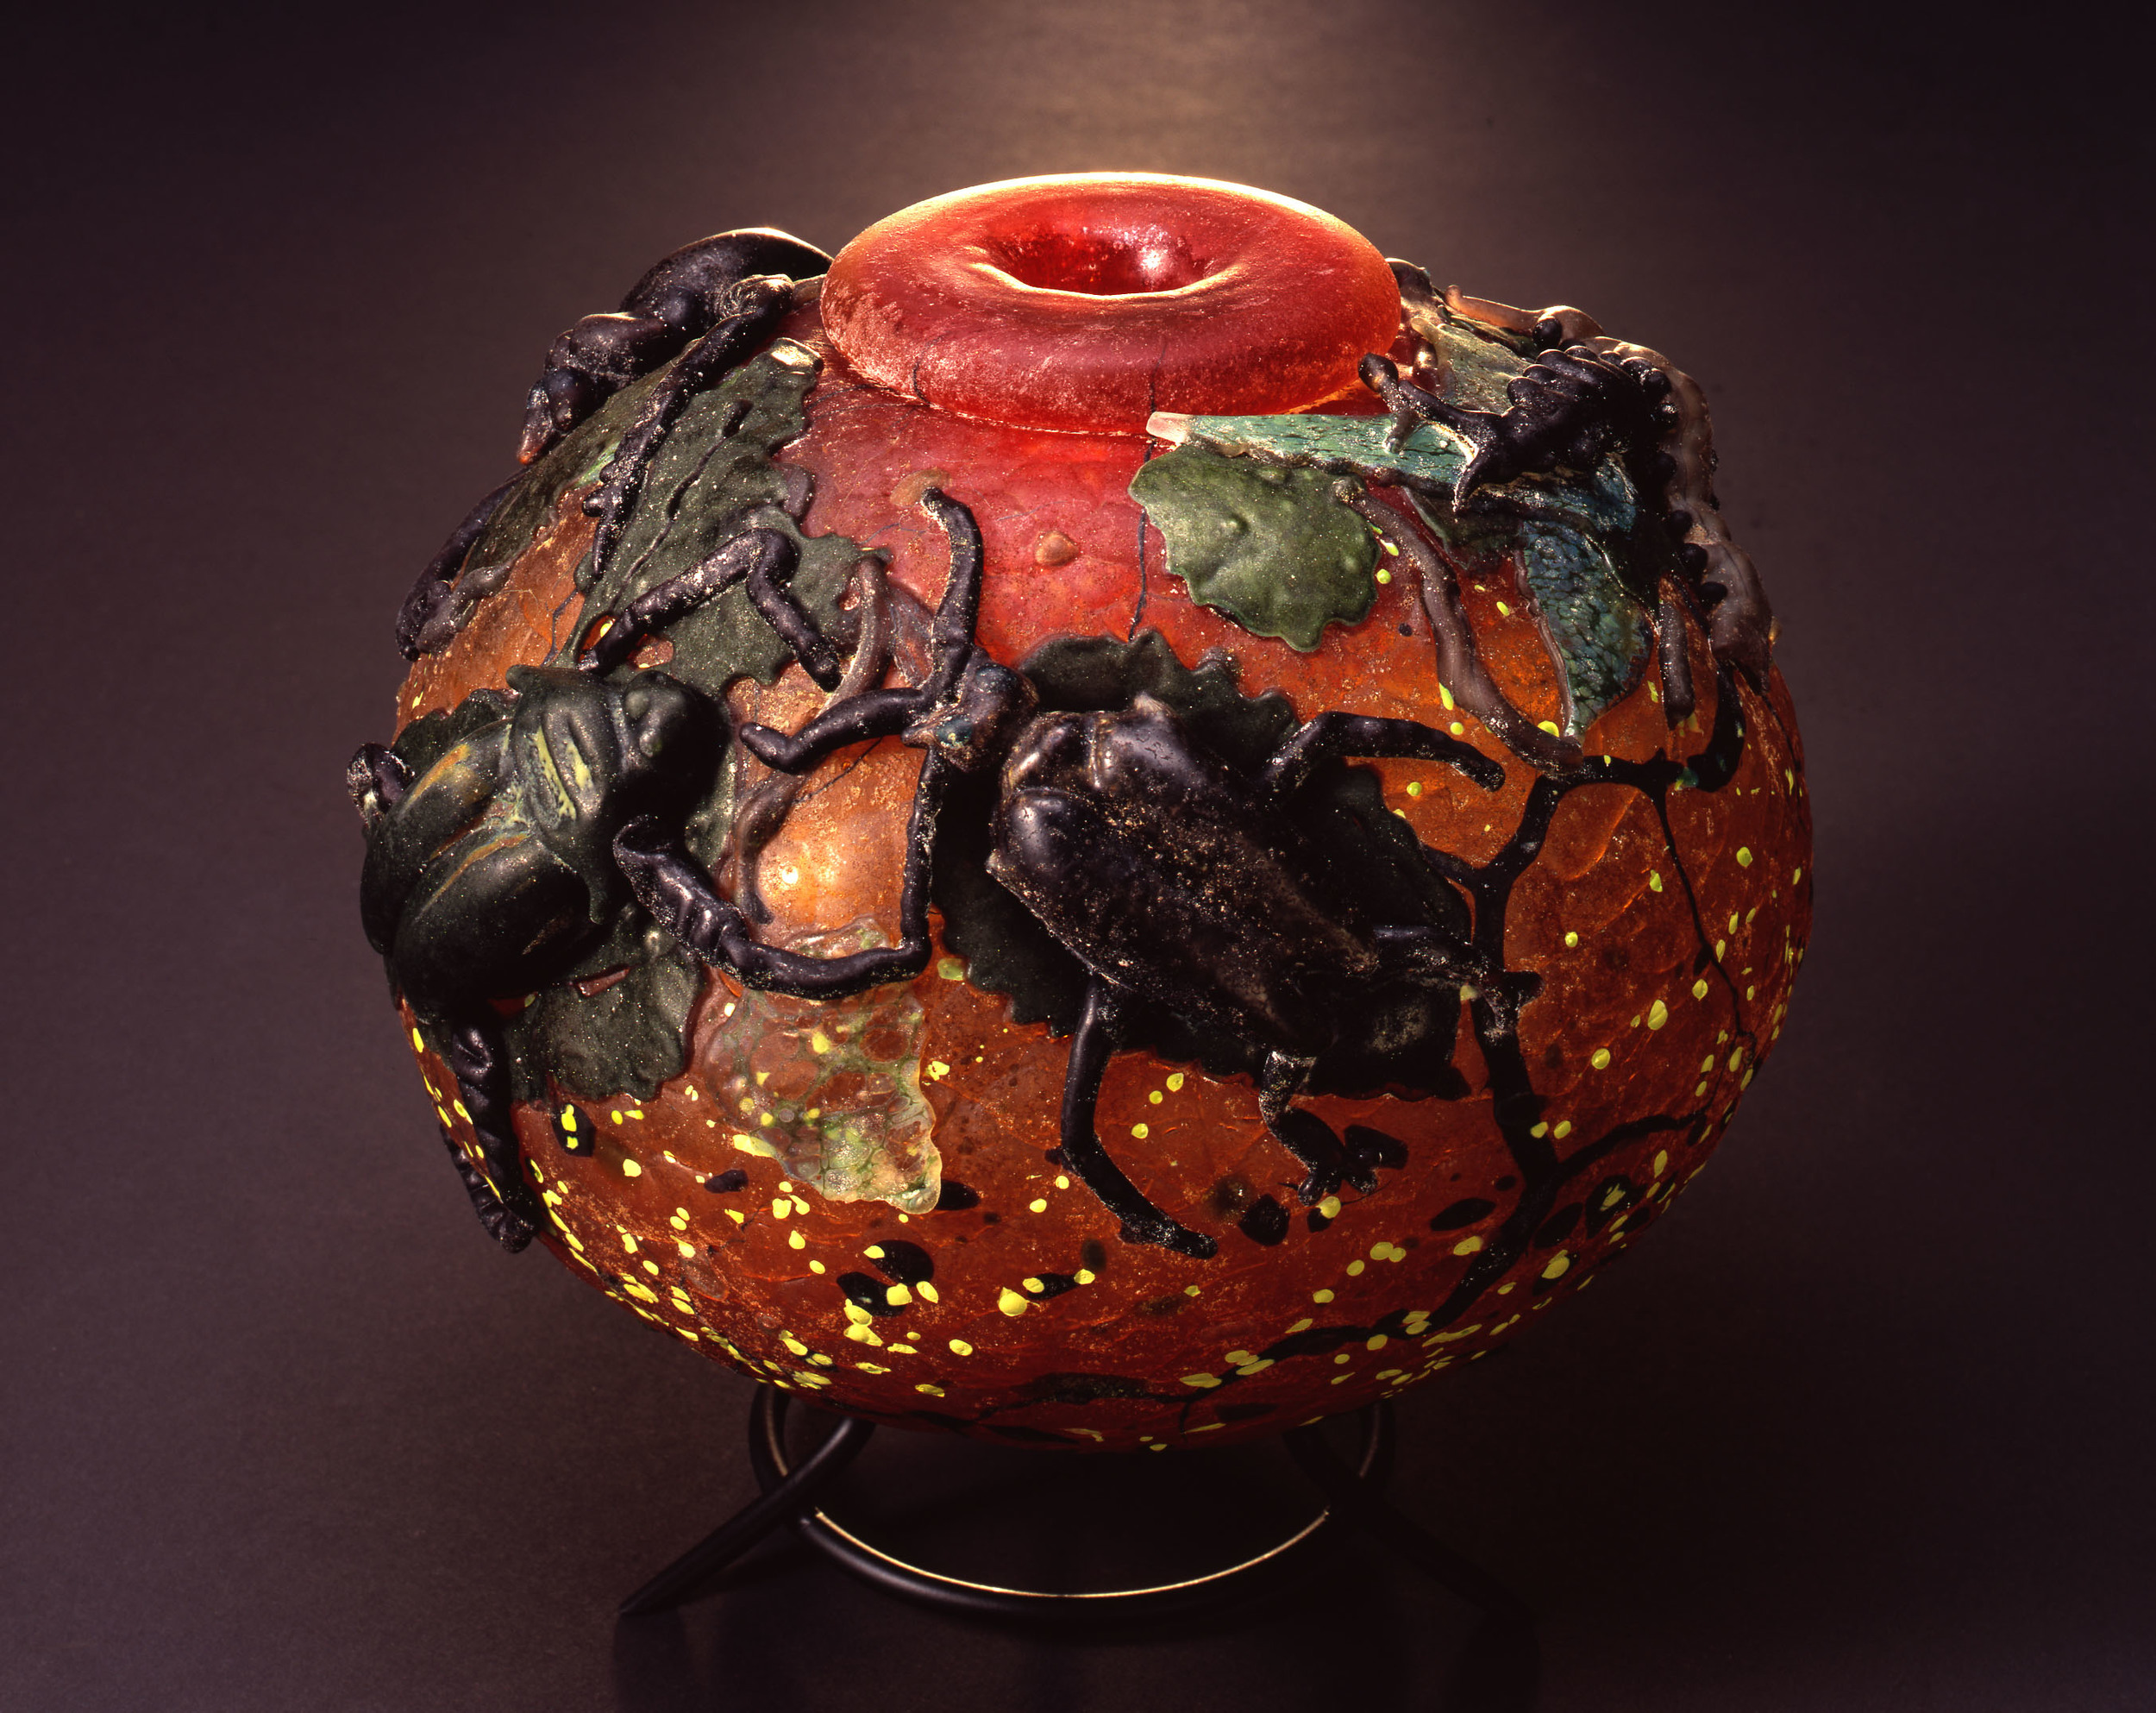  William Morris,&nbsp; Globe Vessel with Beetles and Centipedes  &nbsp; (2004, glass, 71/2 x 7 3/4 x 7 5/8 inches), WM.52 